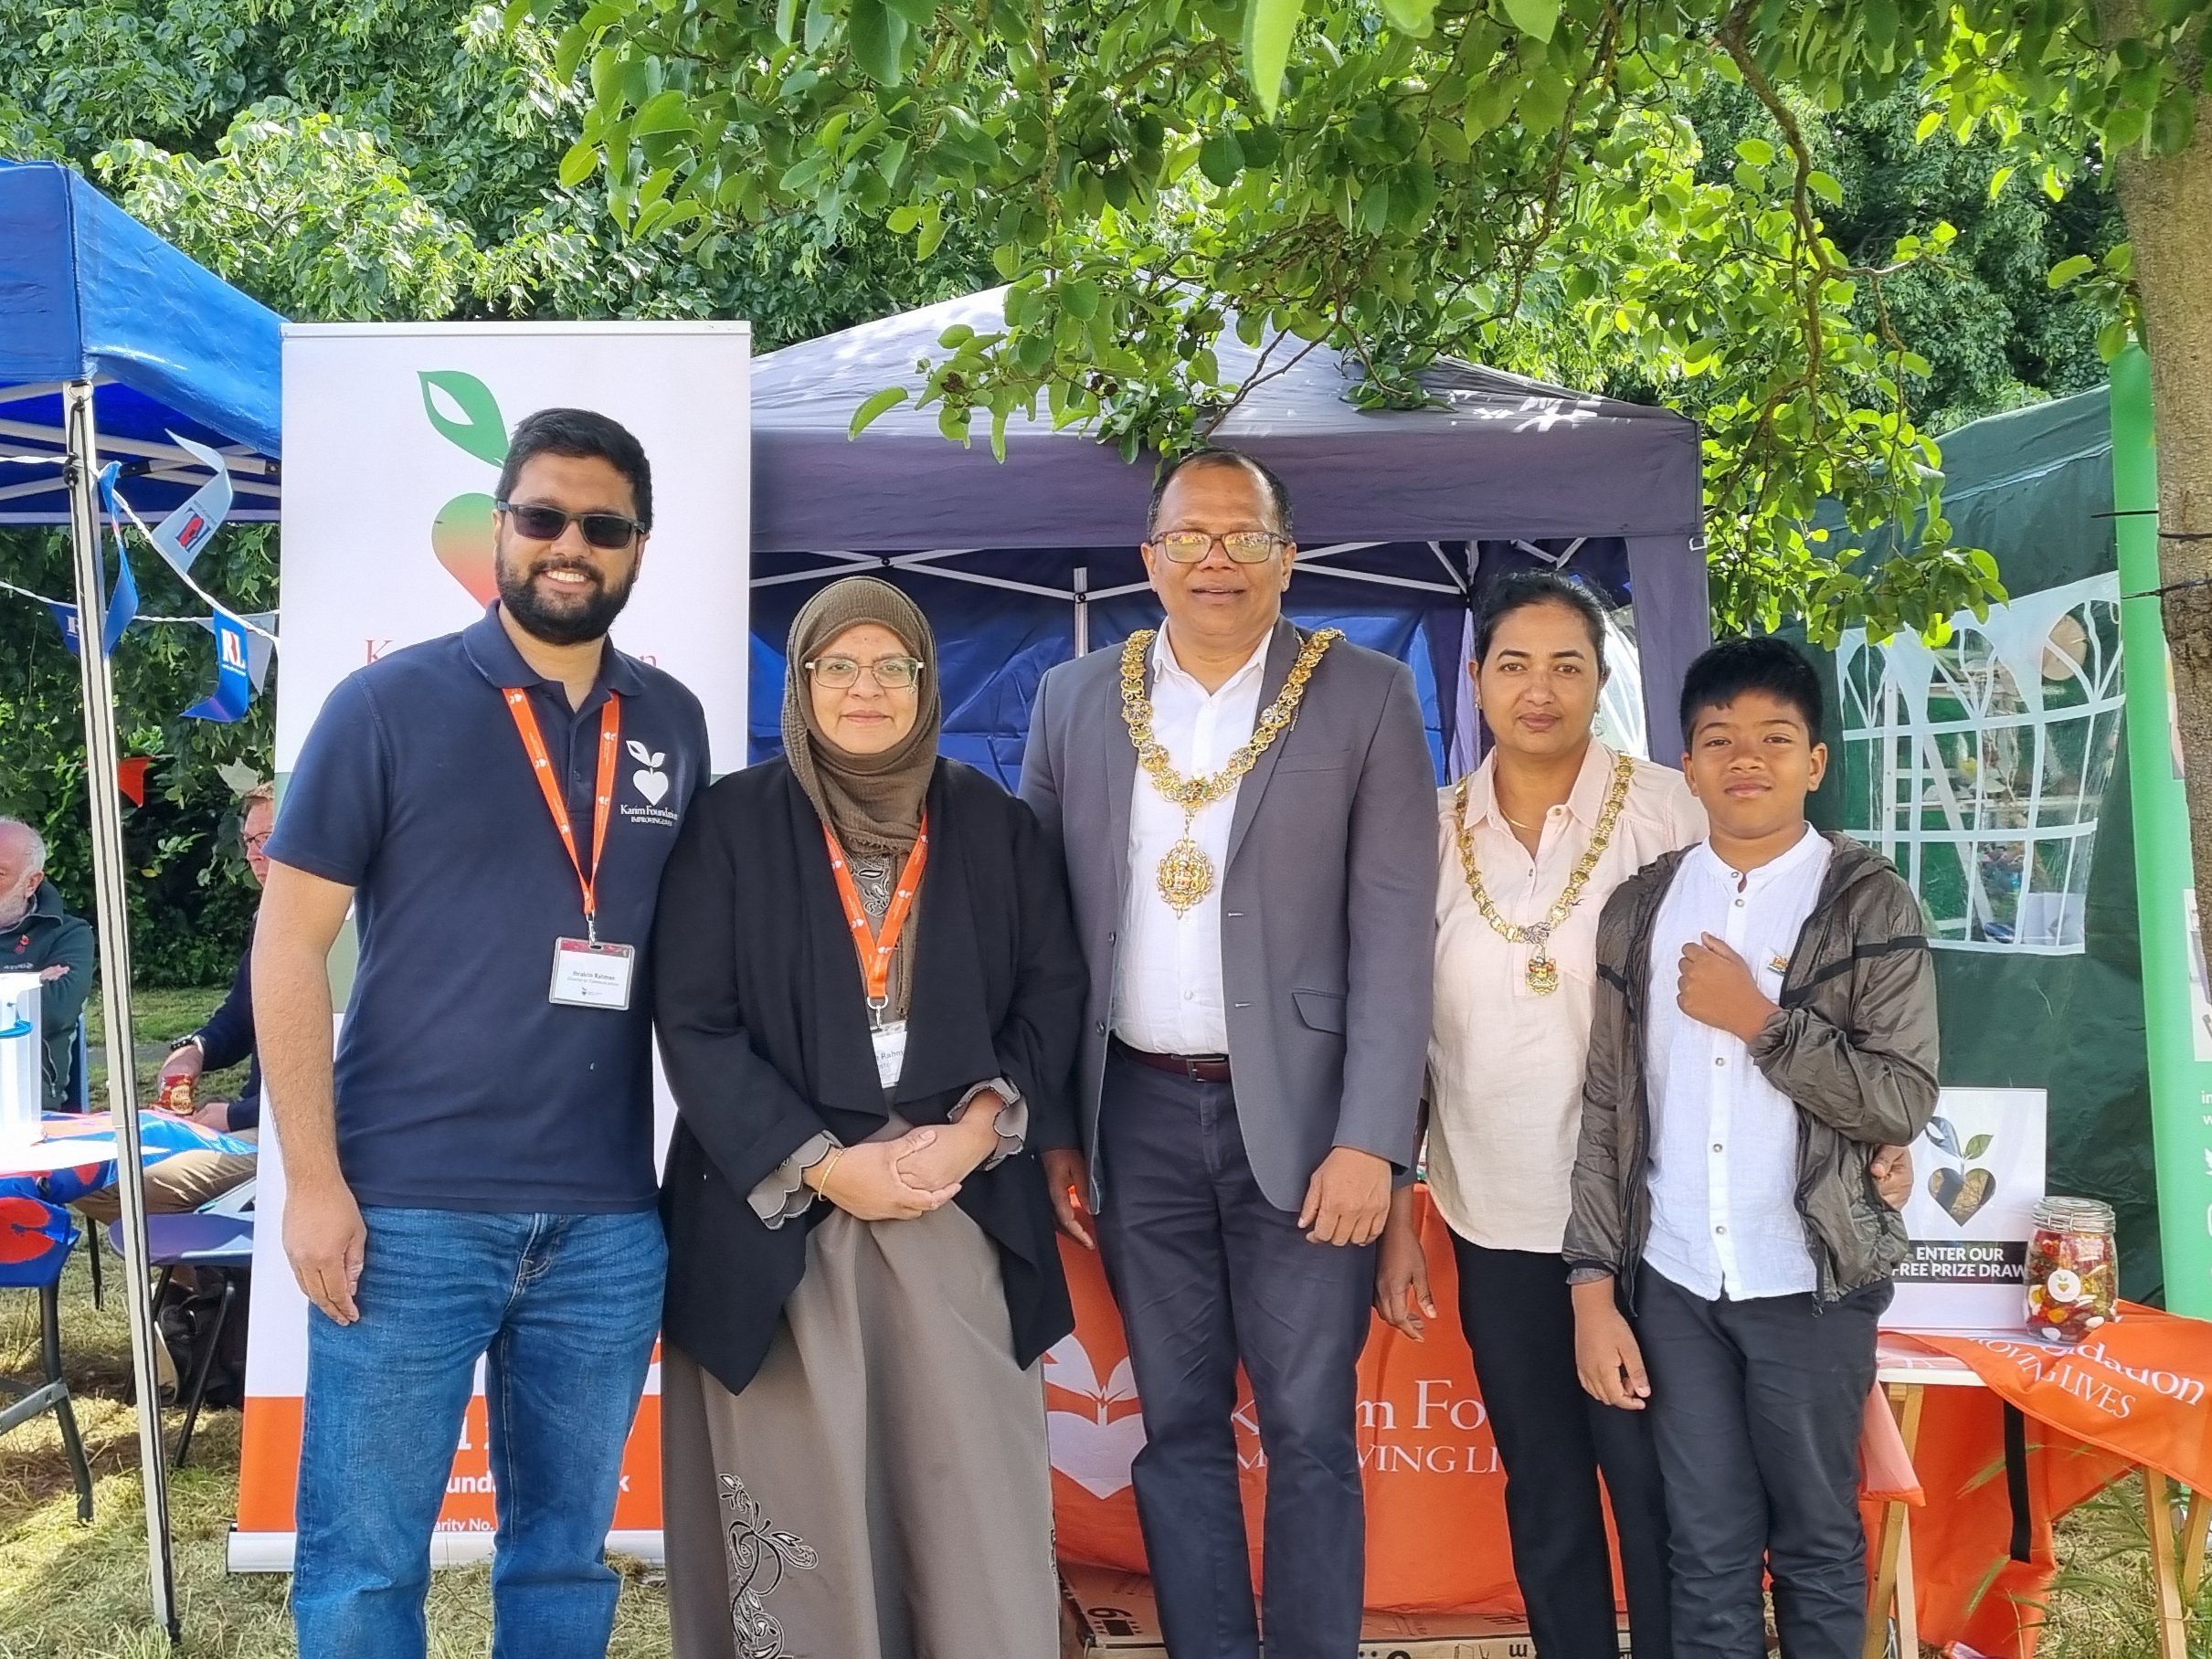 Ibrahim Rahman and Shahida Rahman on the left posing in front of the Karim Foundation stall with Councillor Baiju Thittala, the mayor of Cambridge, who is wearing a formal chain of office, typically worn by civic dignitaries. Standing to the mayor's left are his wife and son.